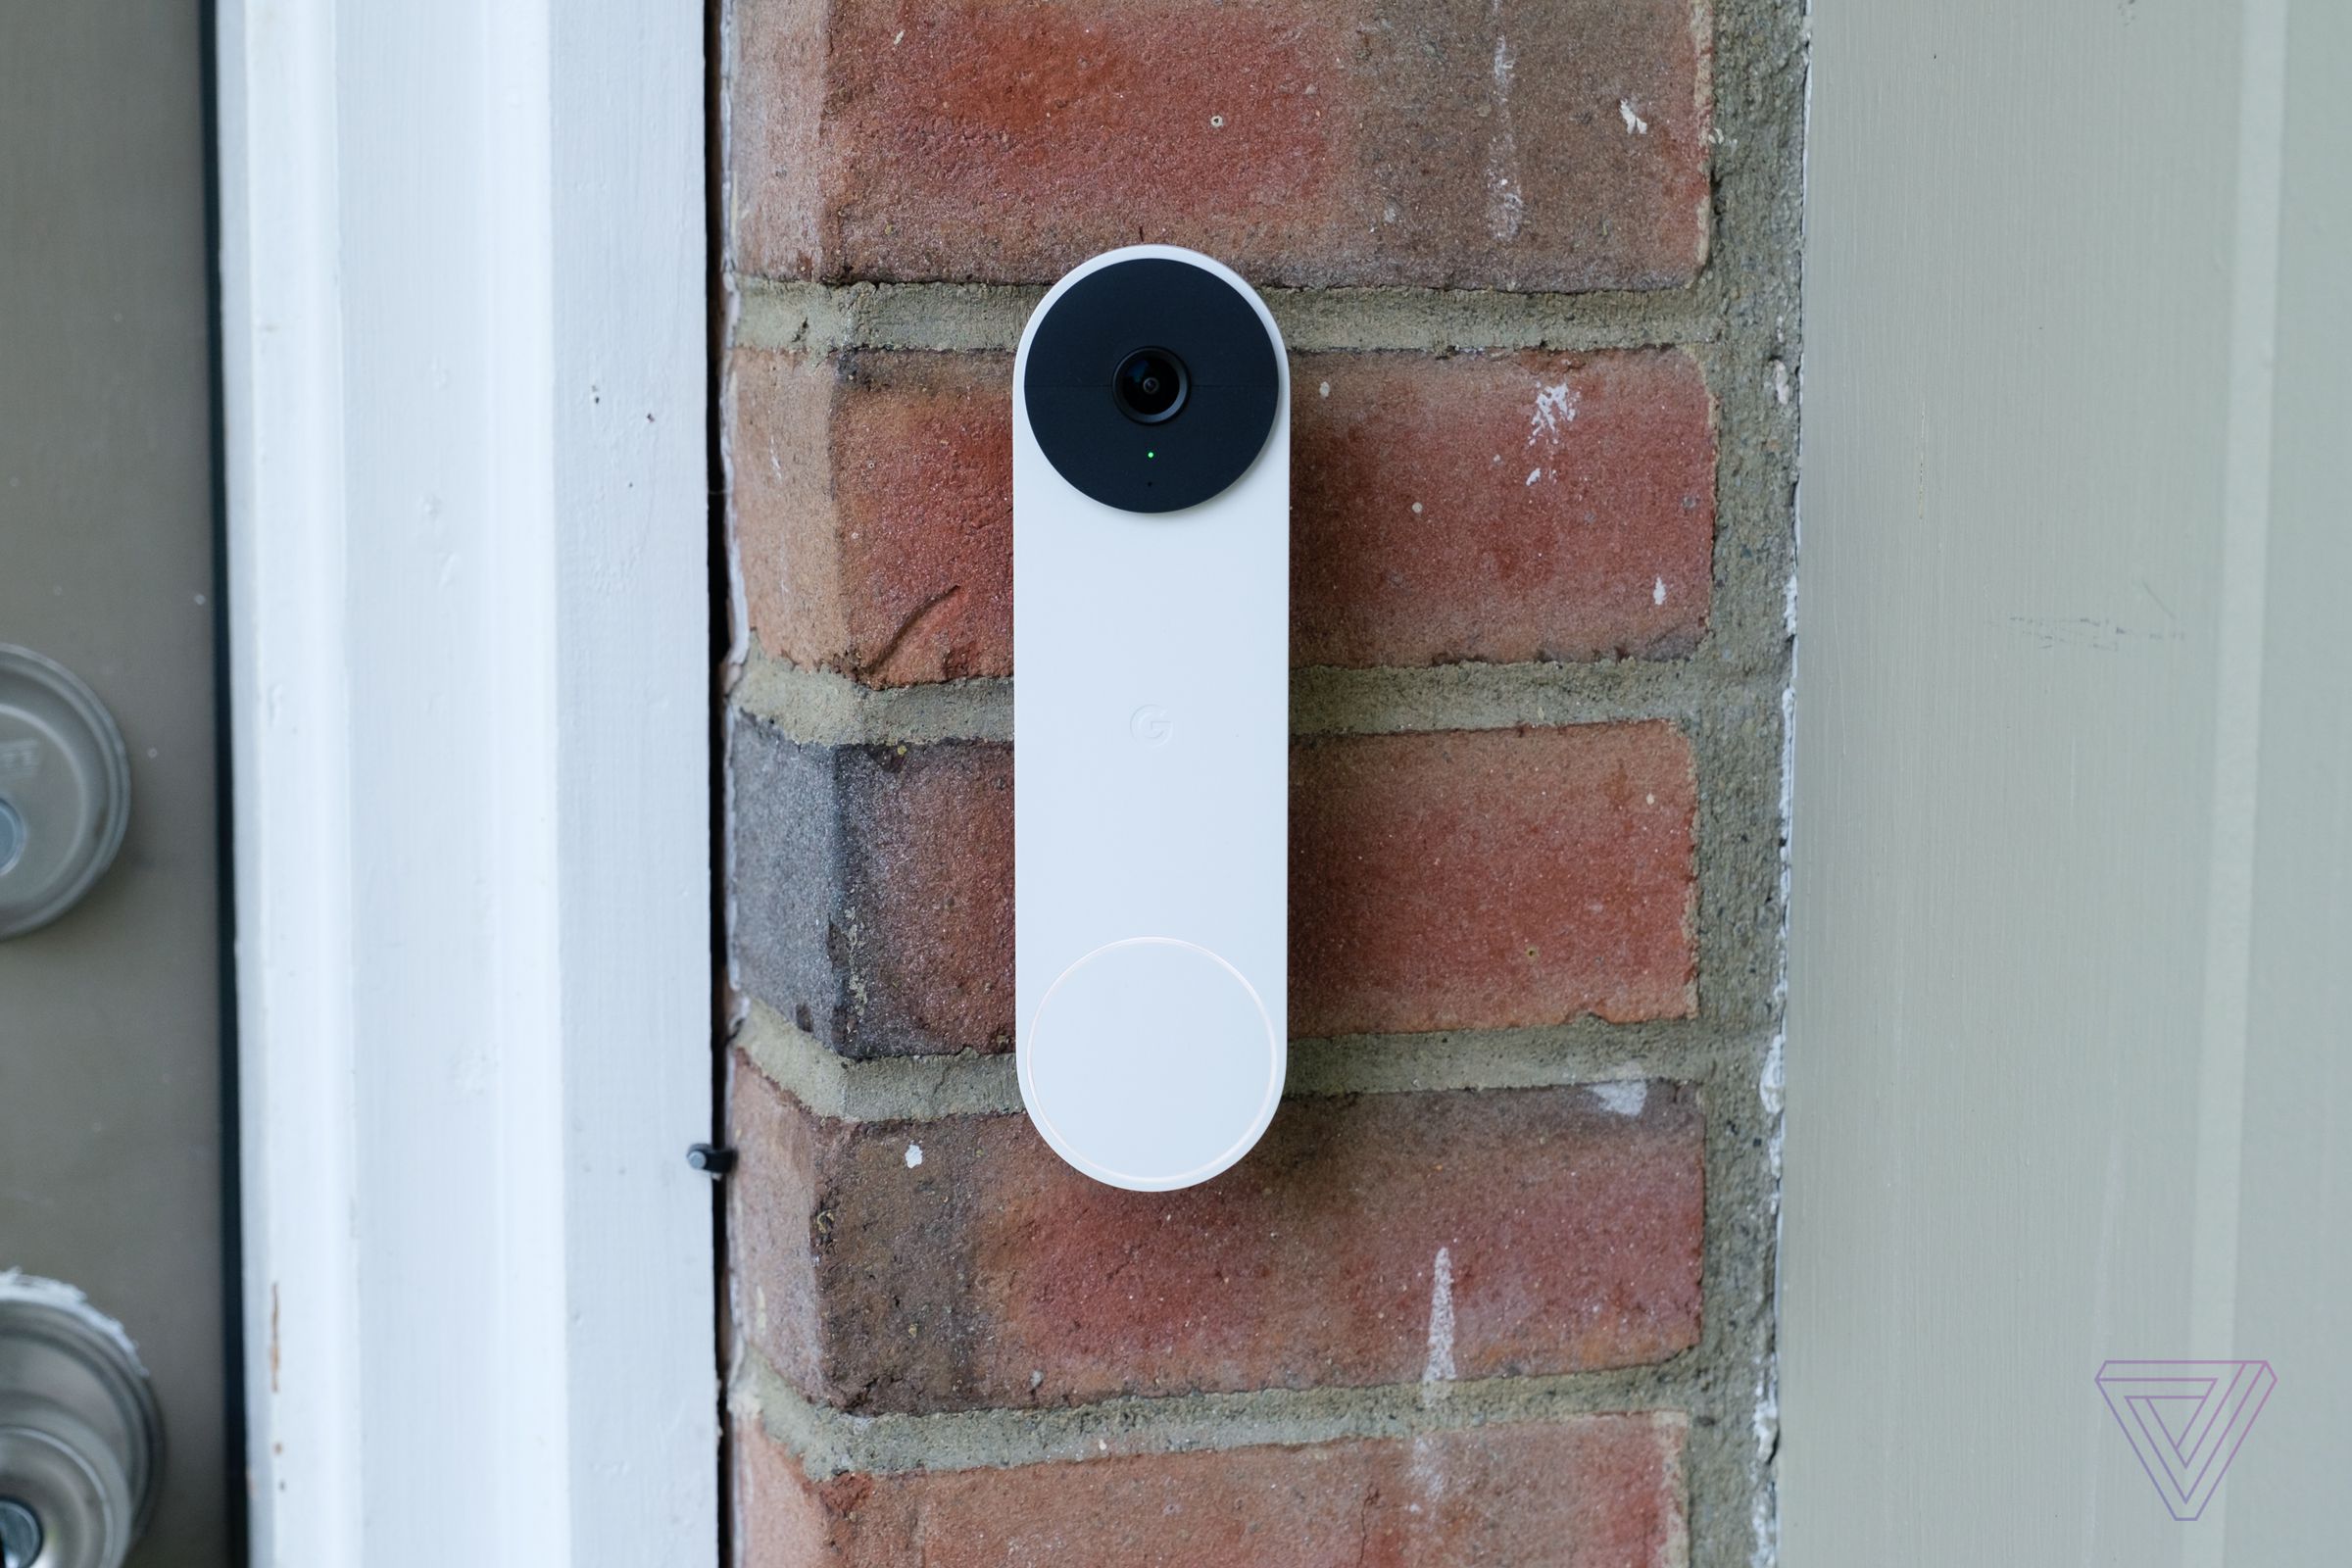 A free doorbell with a floodlight? Why not?